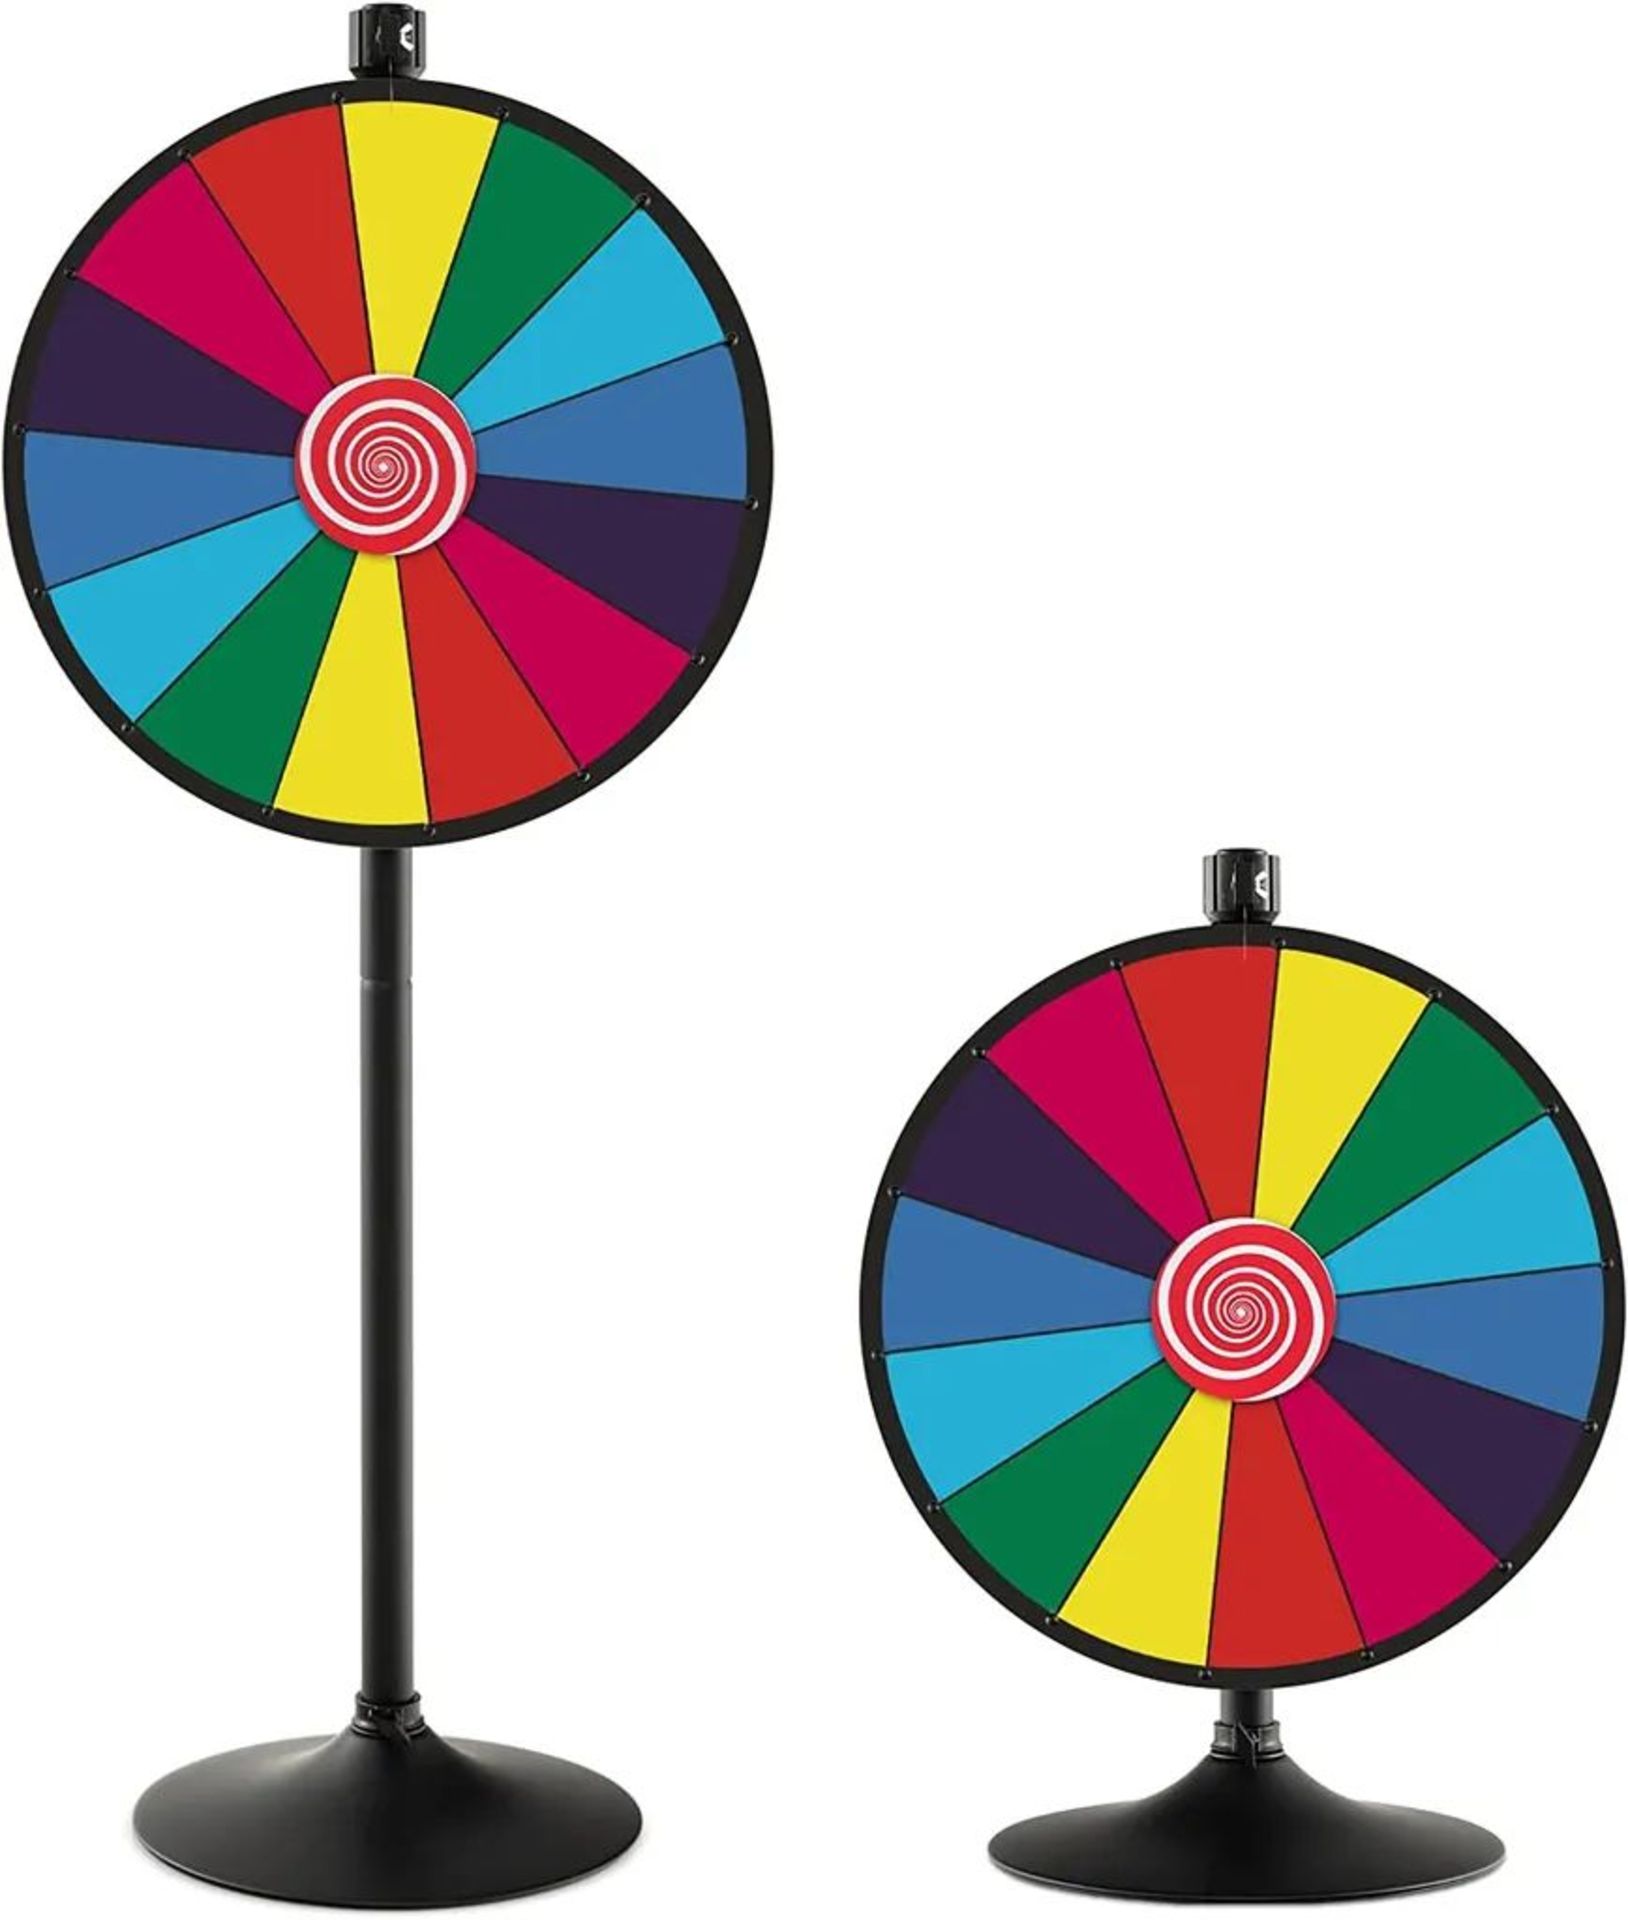 Spinning Wheel of Fortune, Adjustable Spinning Height Wheel of Fortune for Party, Lottery and Word